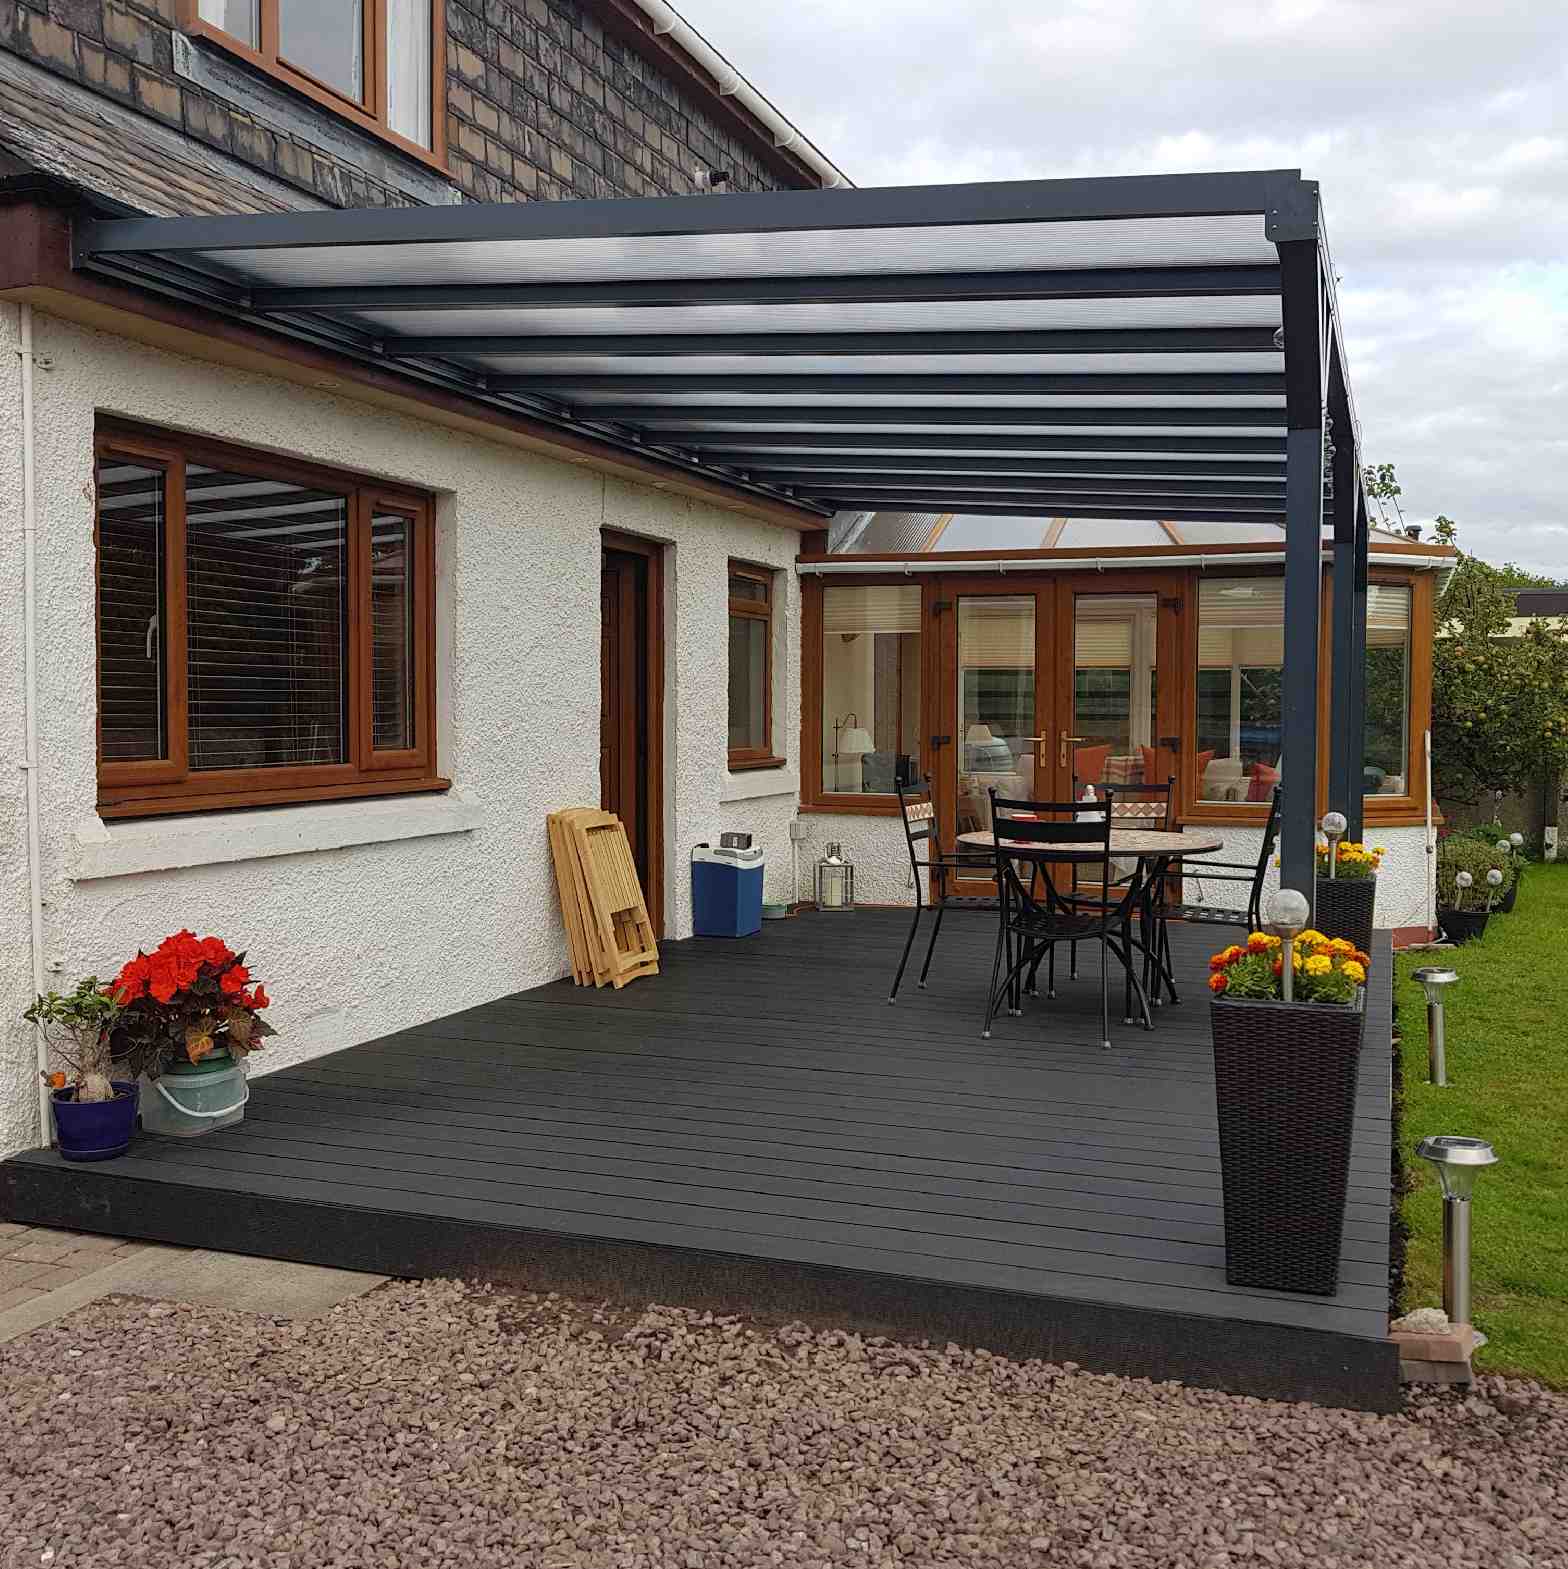 Buy Omega Verandah, Anthracite Grey, 6mm Glass Clear Plate Polycarbonate Glazing - 7.0m (W) x 2.0m (P), (4) Supporting Posts online today